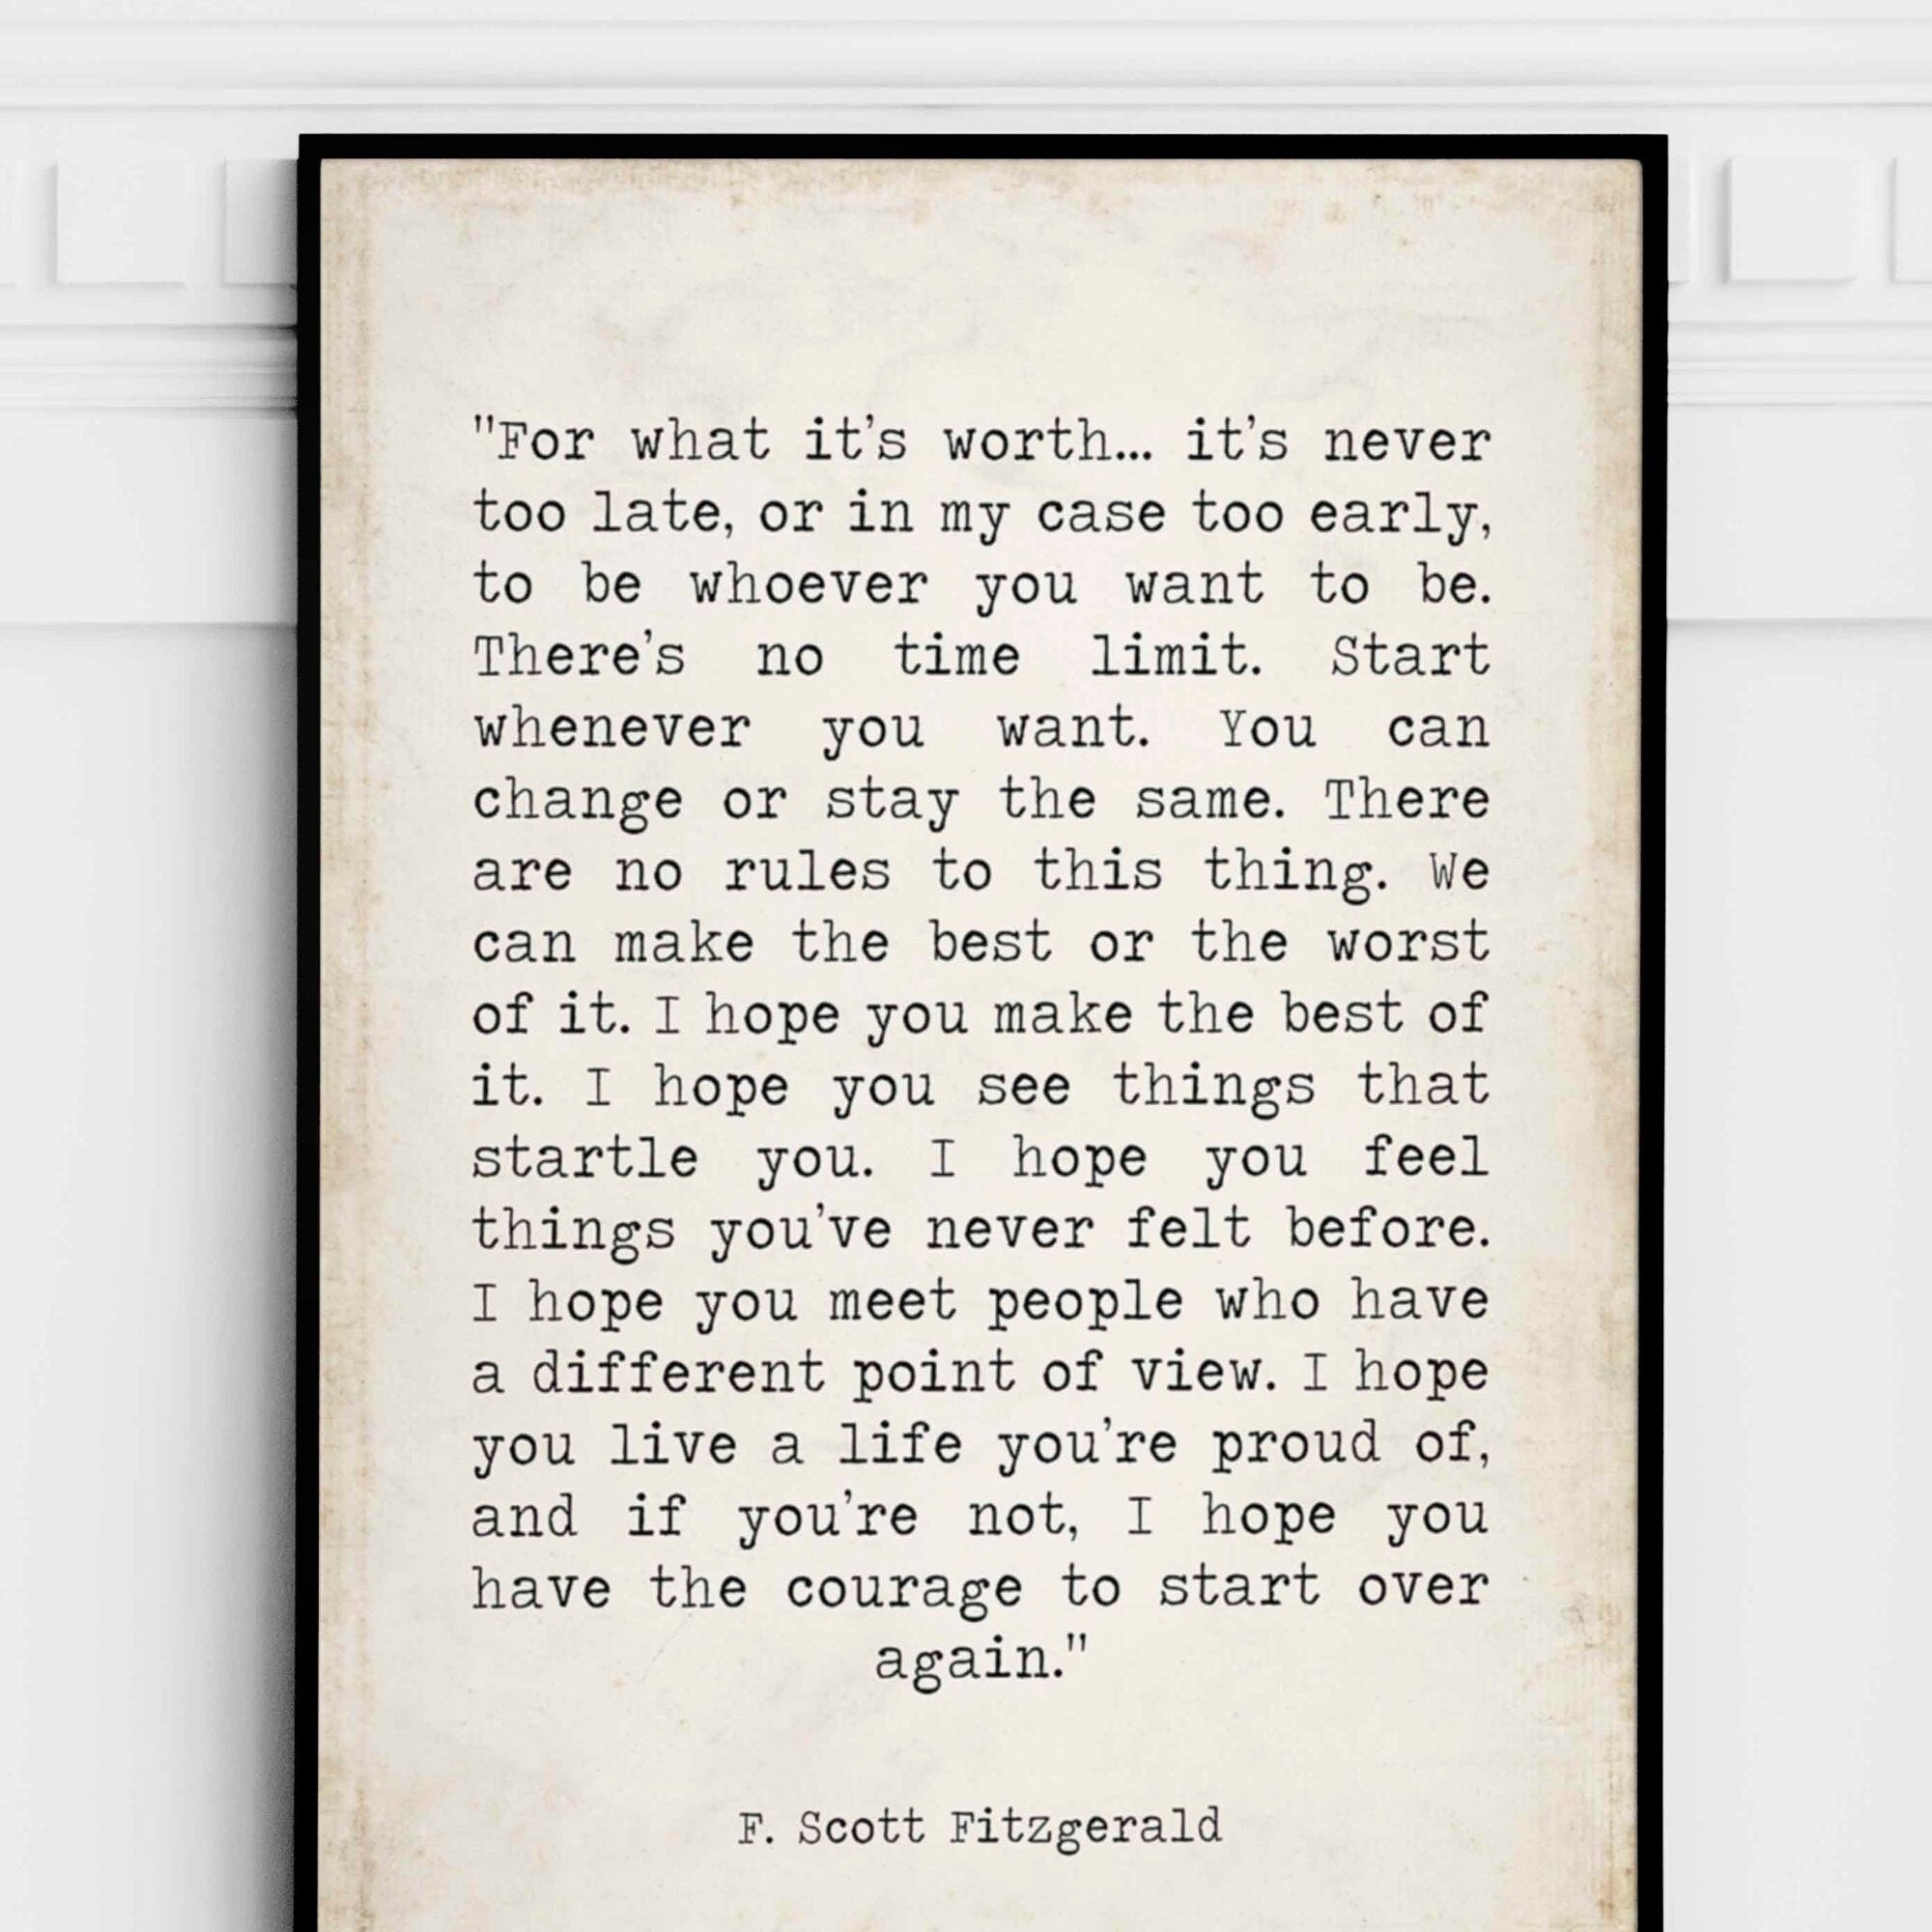 F Scott Fitzgerald For What It's Worth Quote Inspirational Print Gift, Vintage page Typography Quote Print Unframed or Framed Art